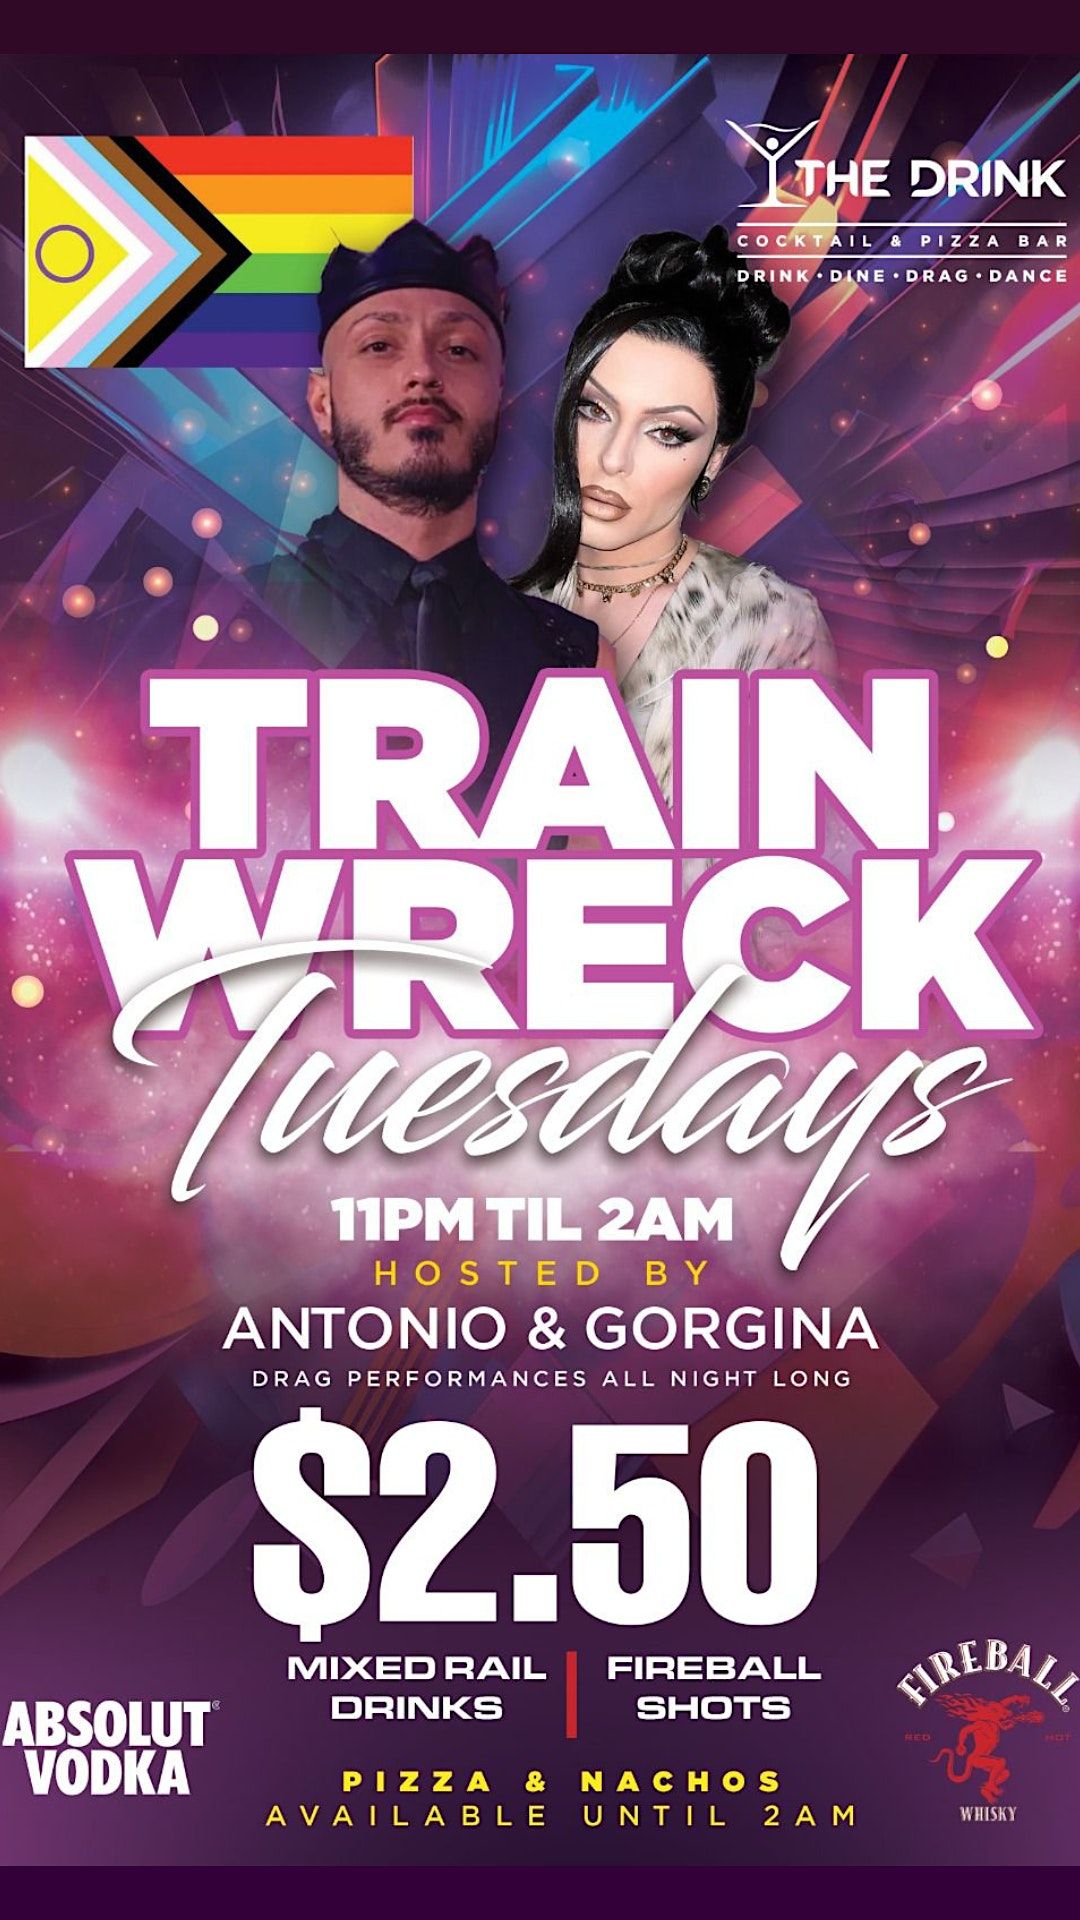 Trainwreck! Drag Party!